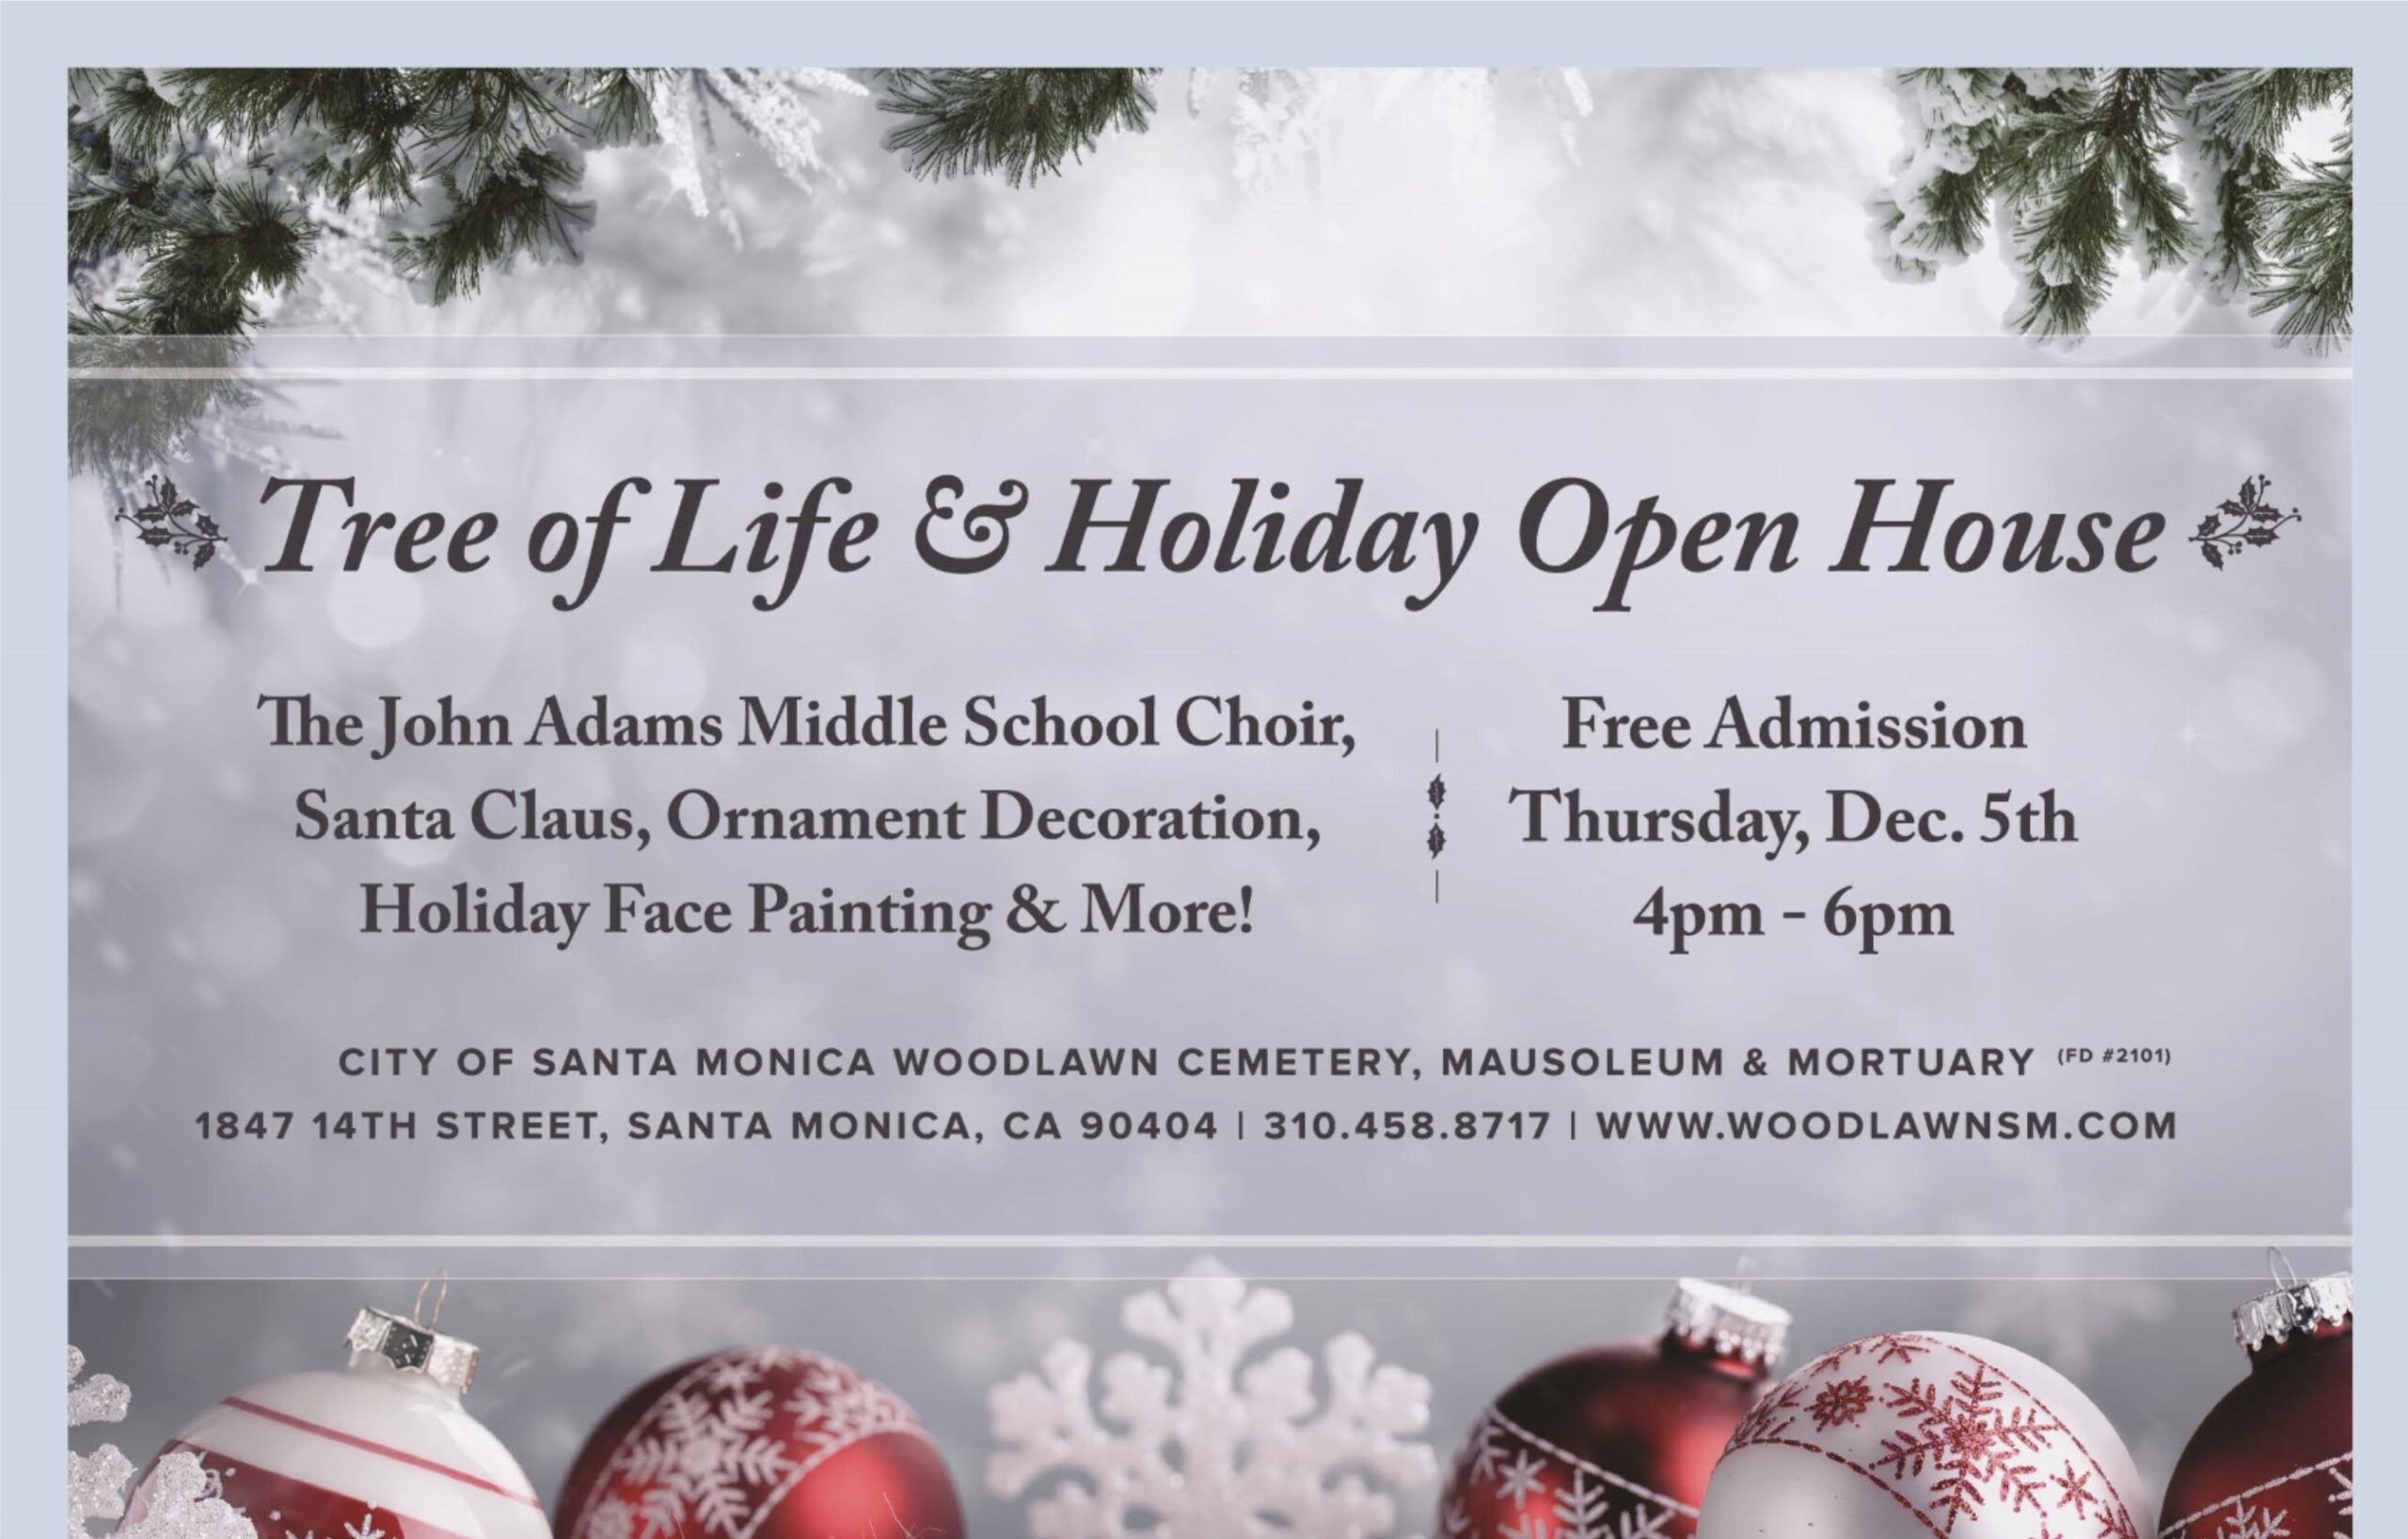 TREE OF LIFE & HOLIDAY OPEN HOUSE 2019